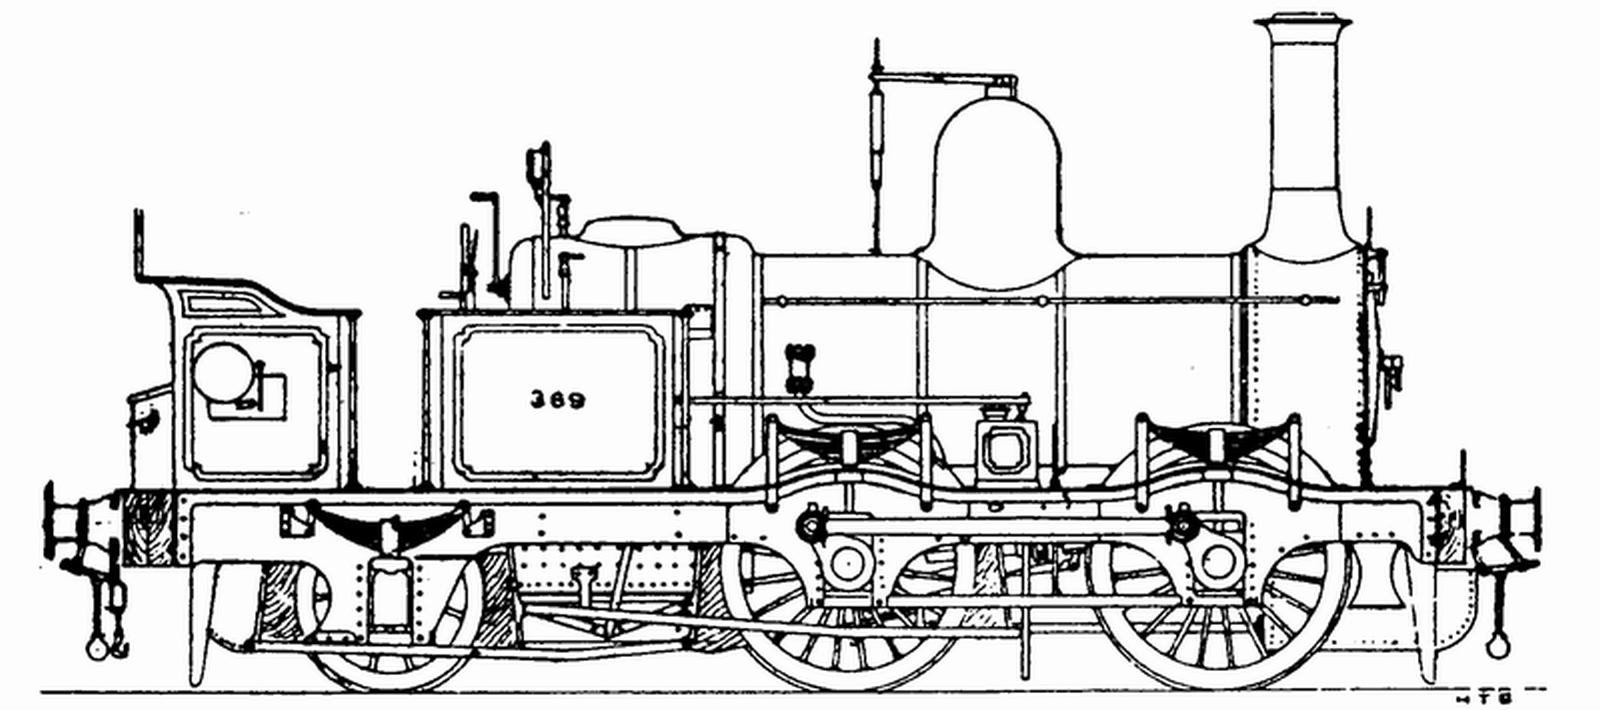 No. 214 after being renumbered to 369 in May 1878